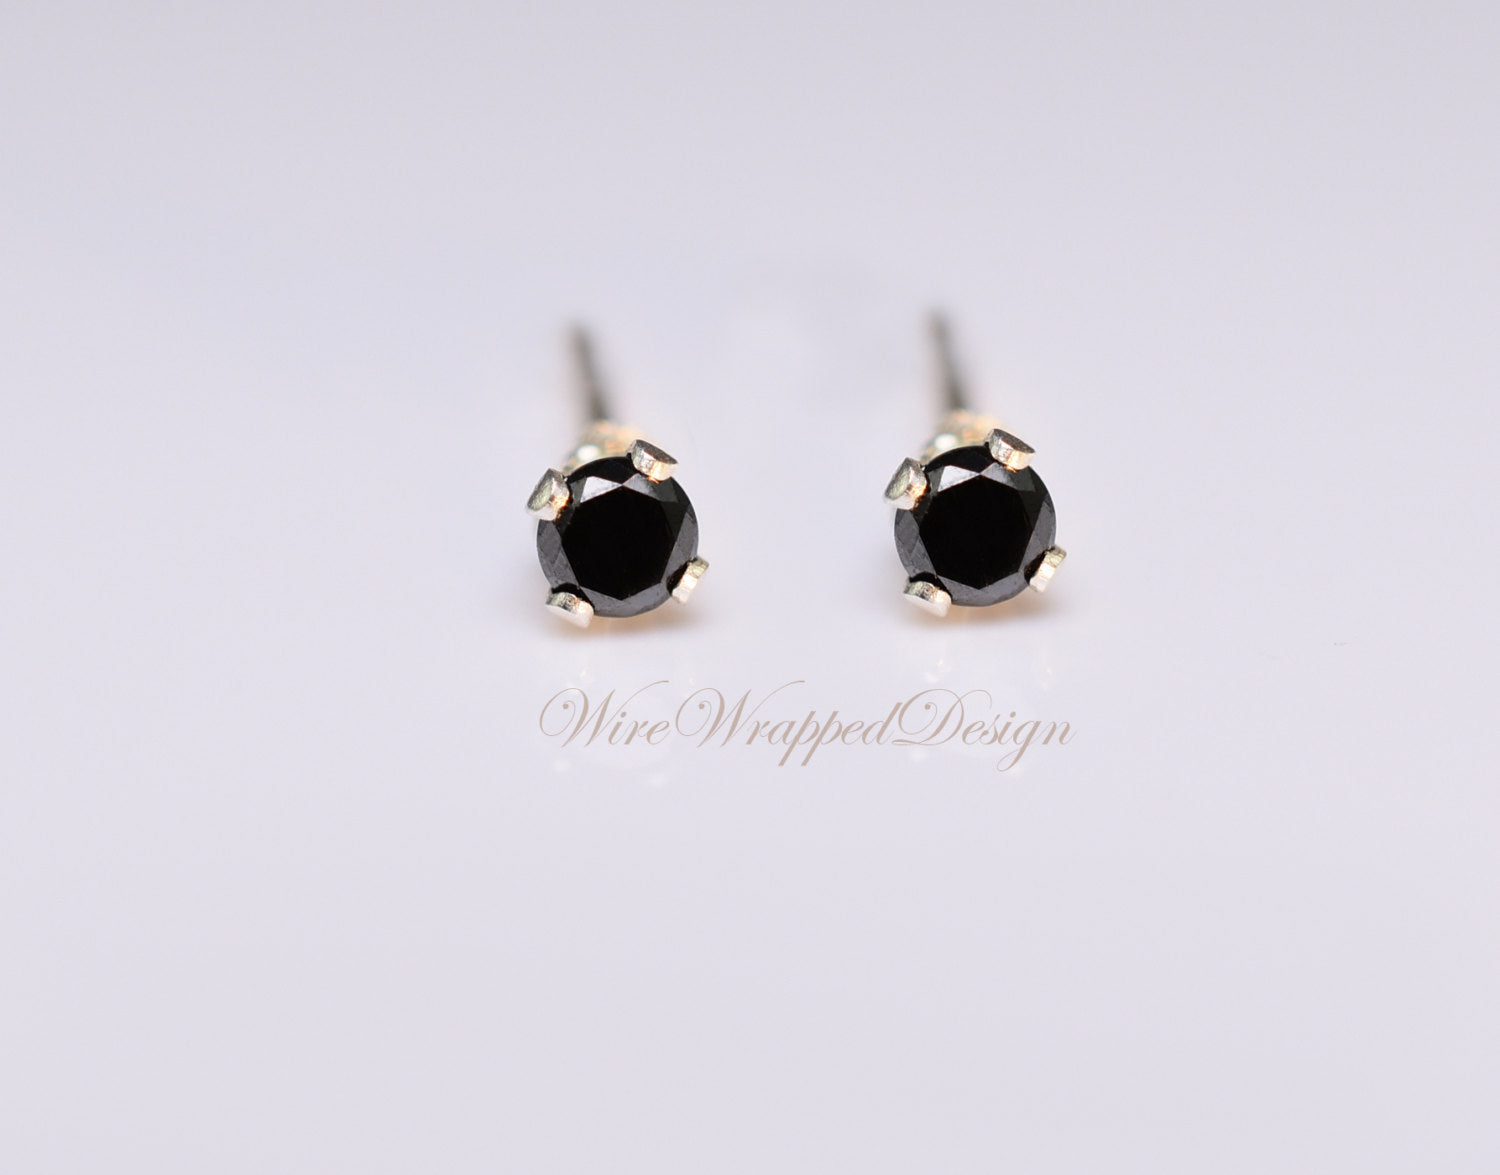 Genuine BLACK DIAMOND Earring Studs 3mm 0.24tcw Post 14k Solid Gold (Yellow, Rose or White), Platinum, Silver Lobe Cartilage Helix Tragus